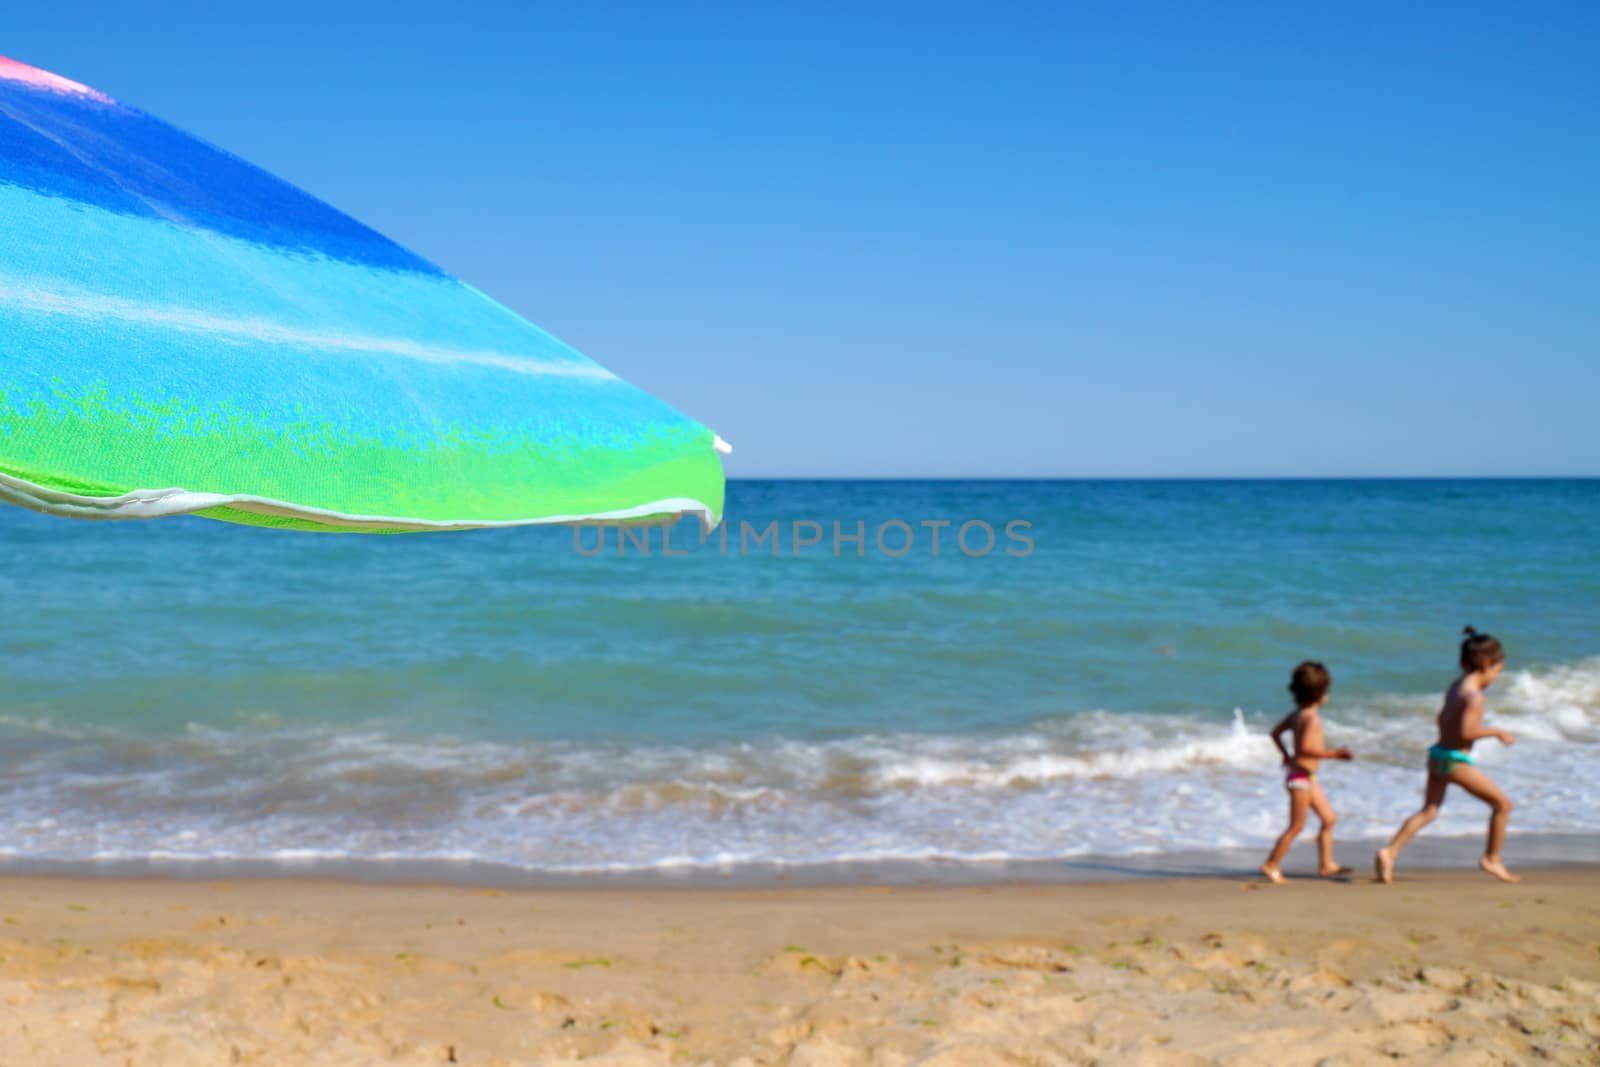 beach umbrella and sunglasses against the sea horizon and clear sky, copy space. by Annado